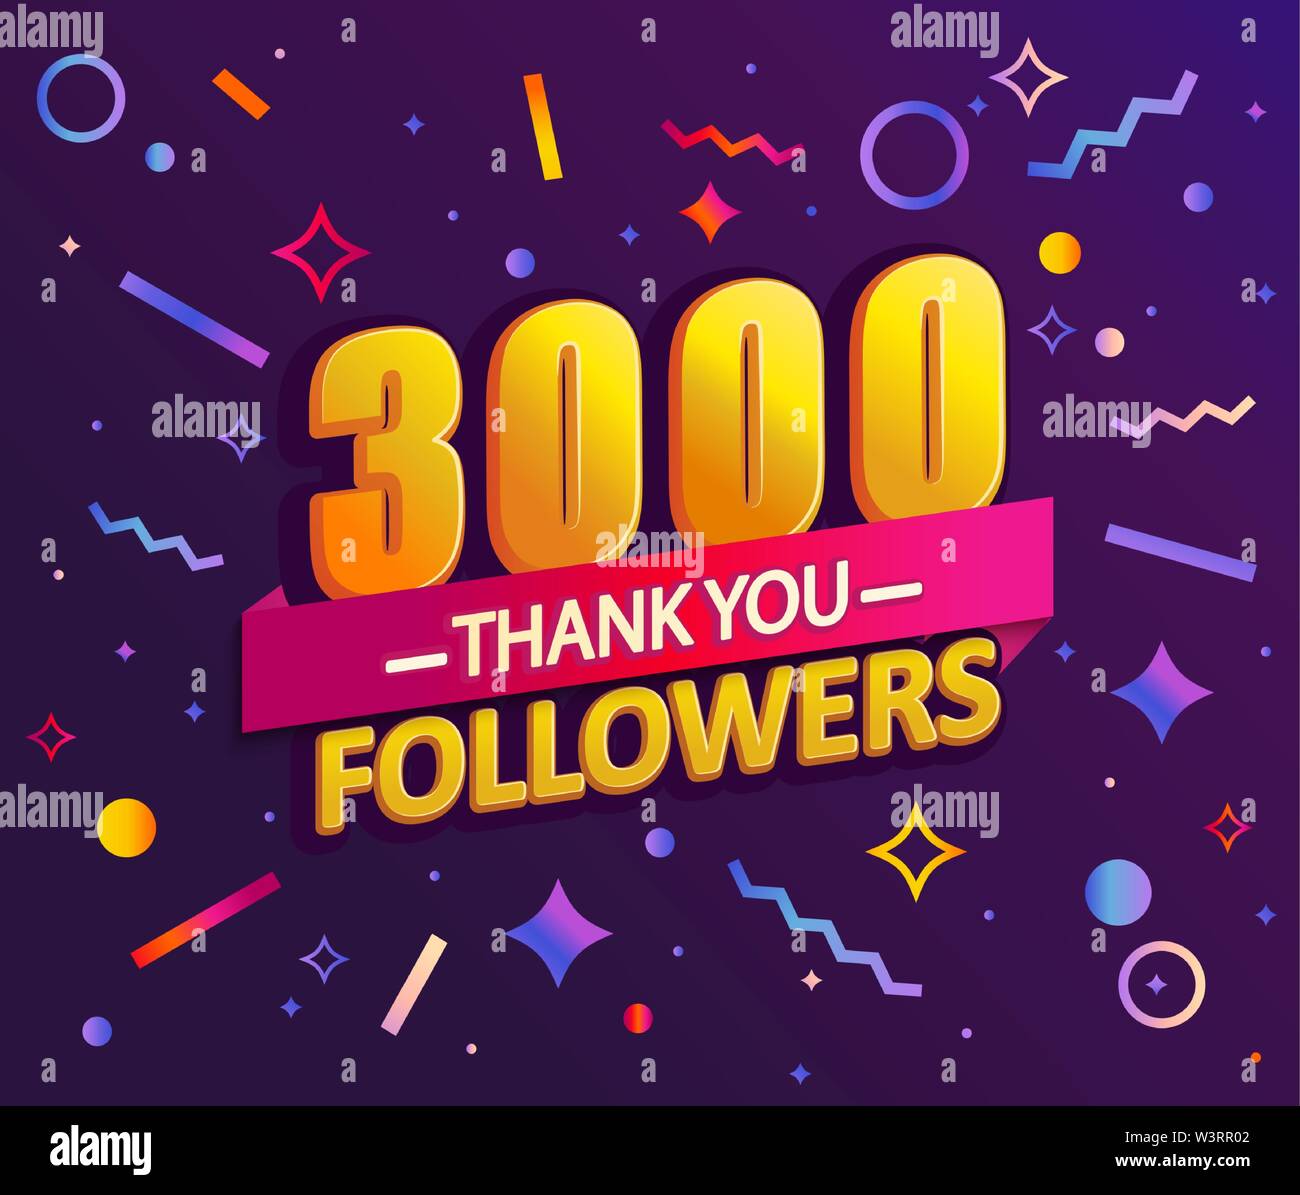 Thank you 3000 followers, thanks banner. Stock Vector